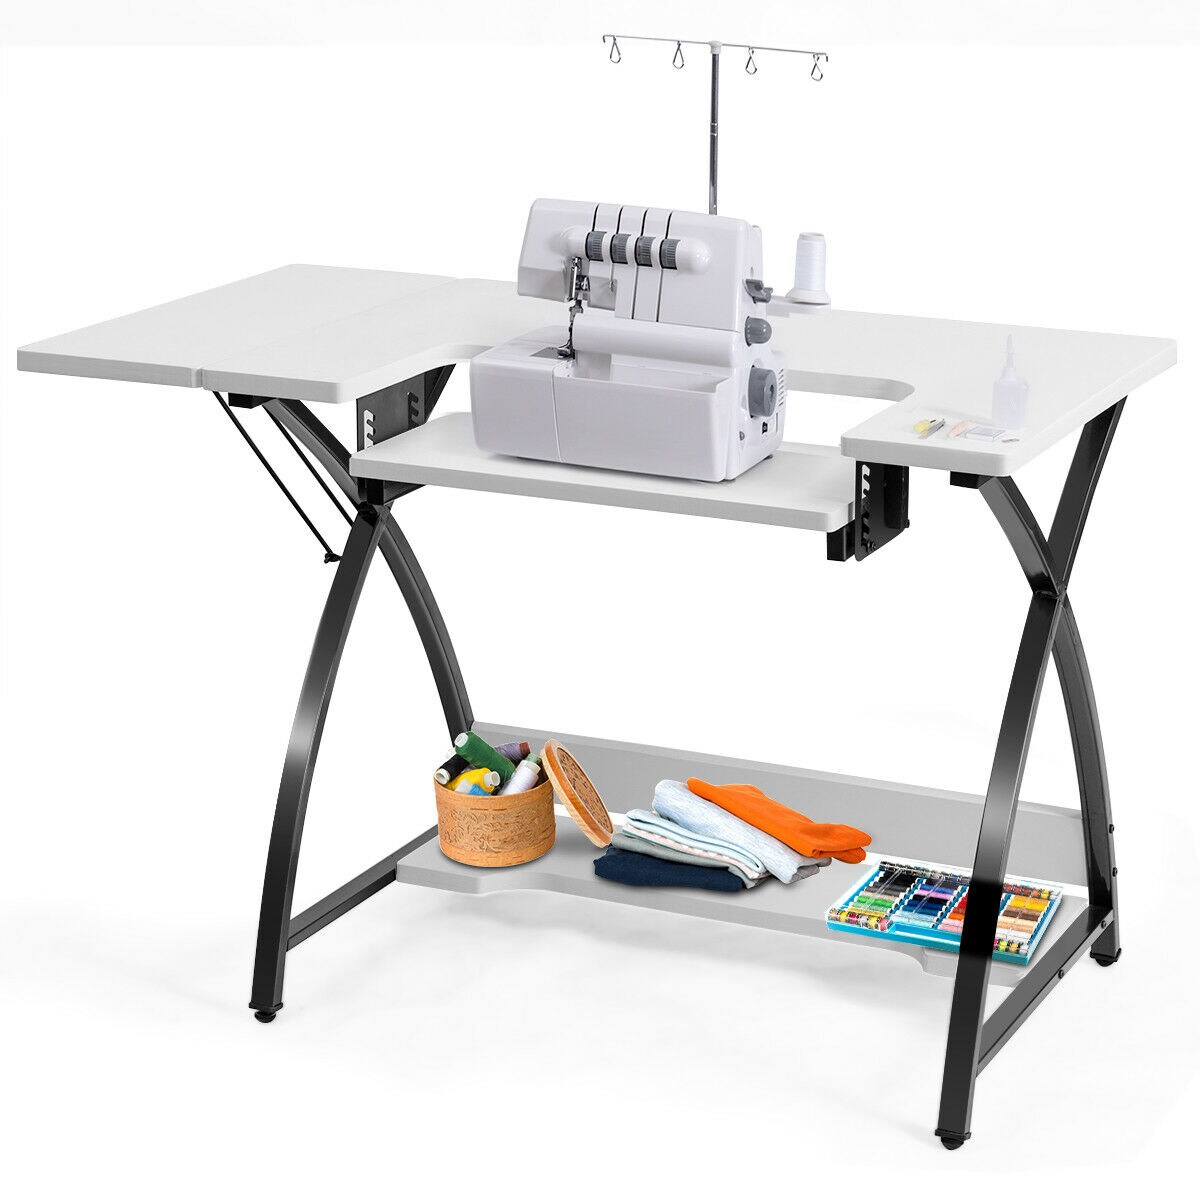 Costway Folding Sewing Table Shelves Storage Cabinet Craft Cart W